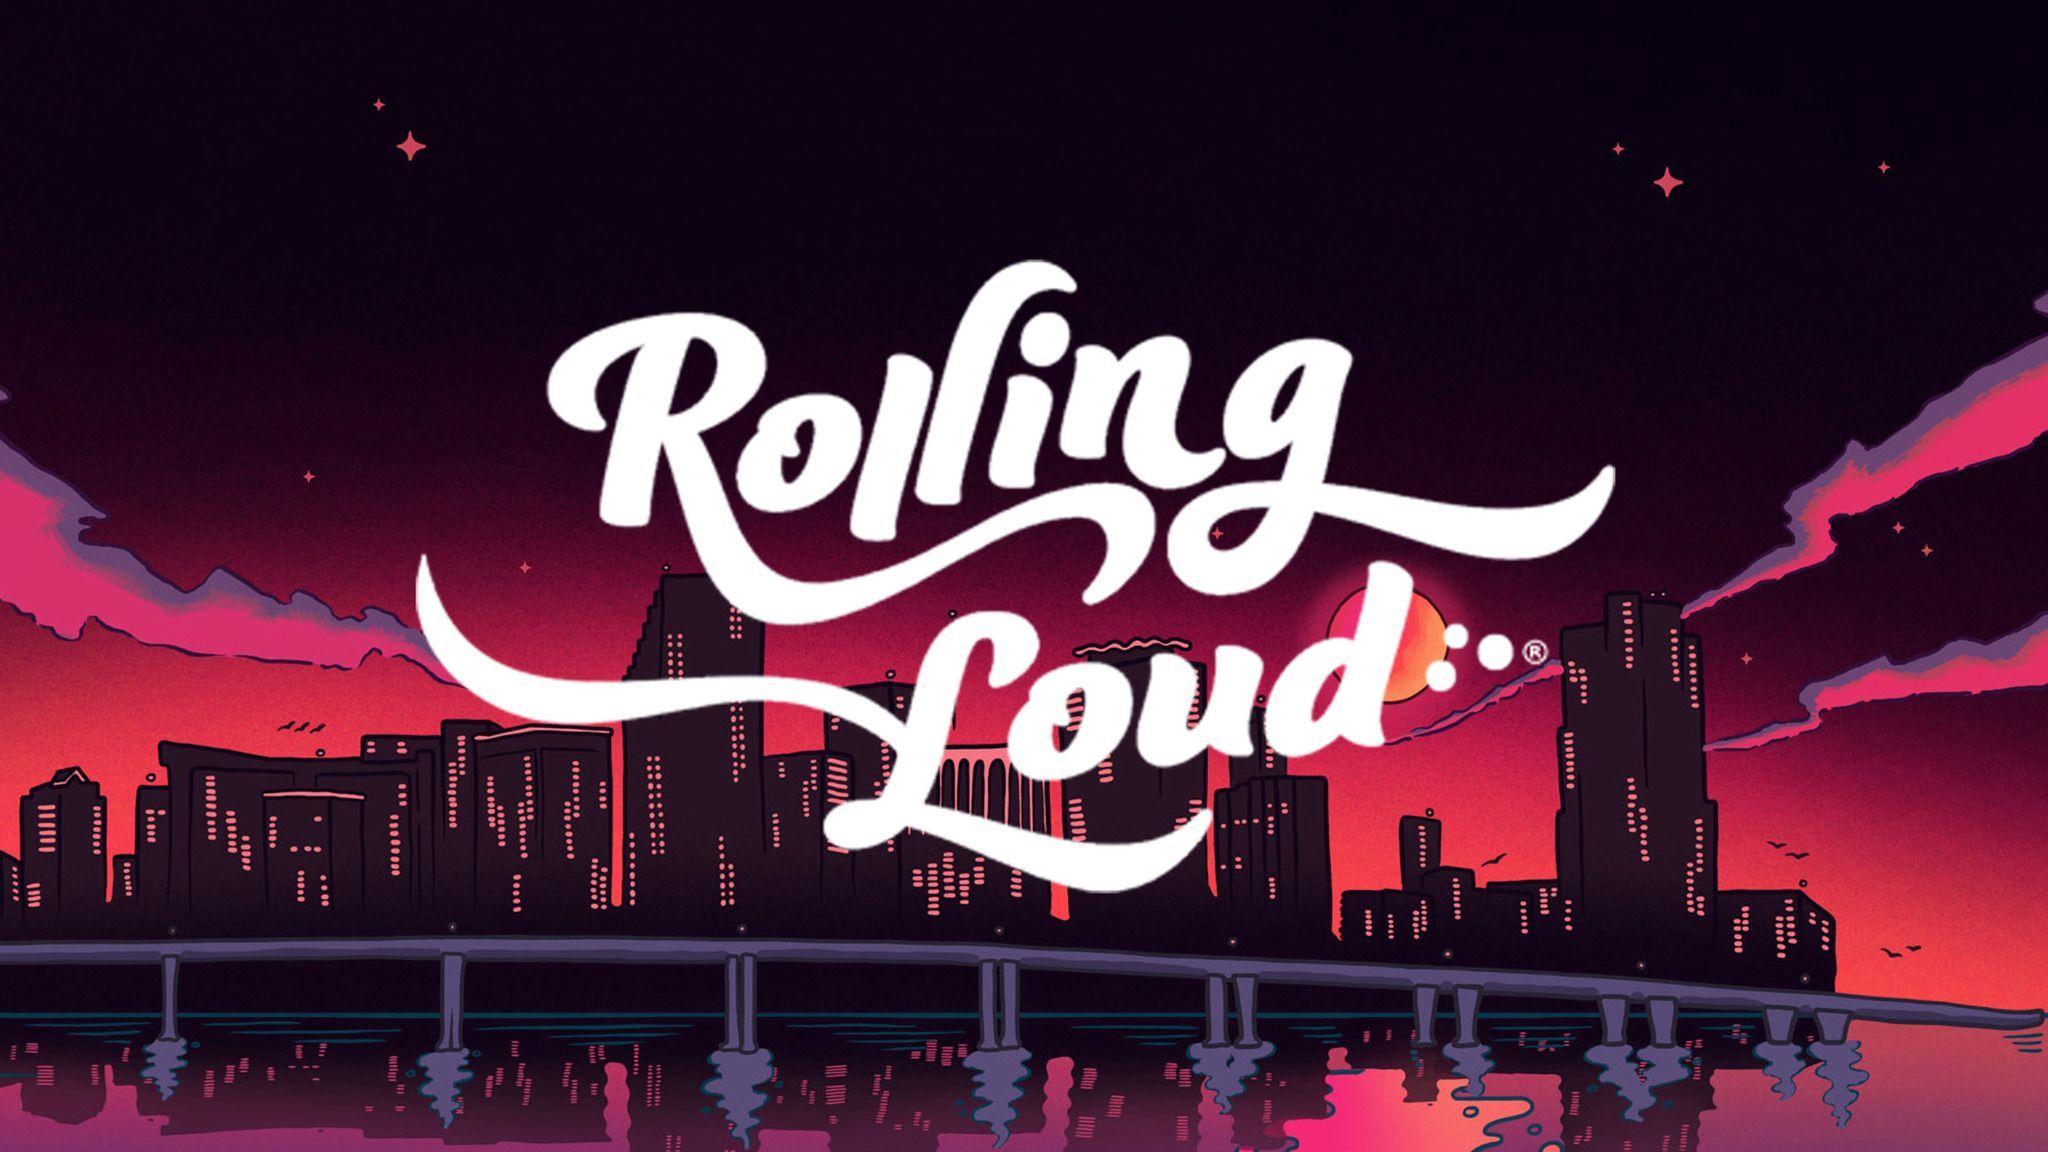 Tons of awesome Rolling Loud 2020 wallpapers to download for free. 